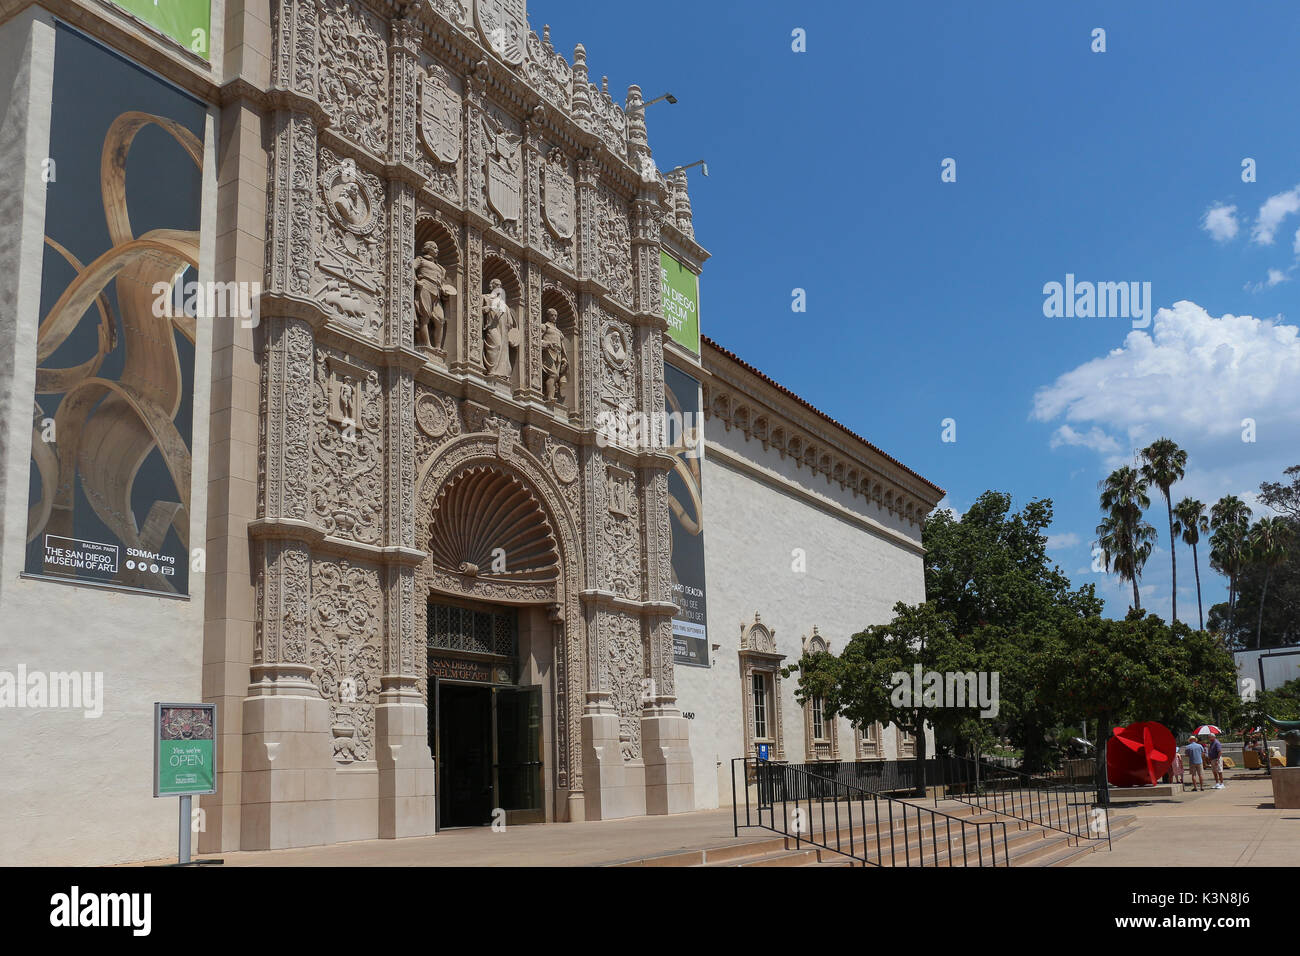 The highly decorated facade of the San Diego Museum of Art in San Diego, California, was designed in a Spanish-Renaissance architectural style. Stock Photo